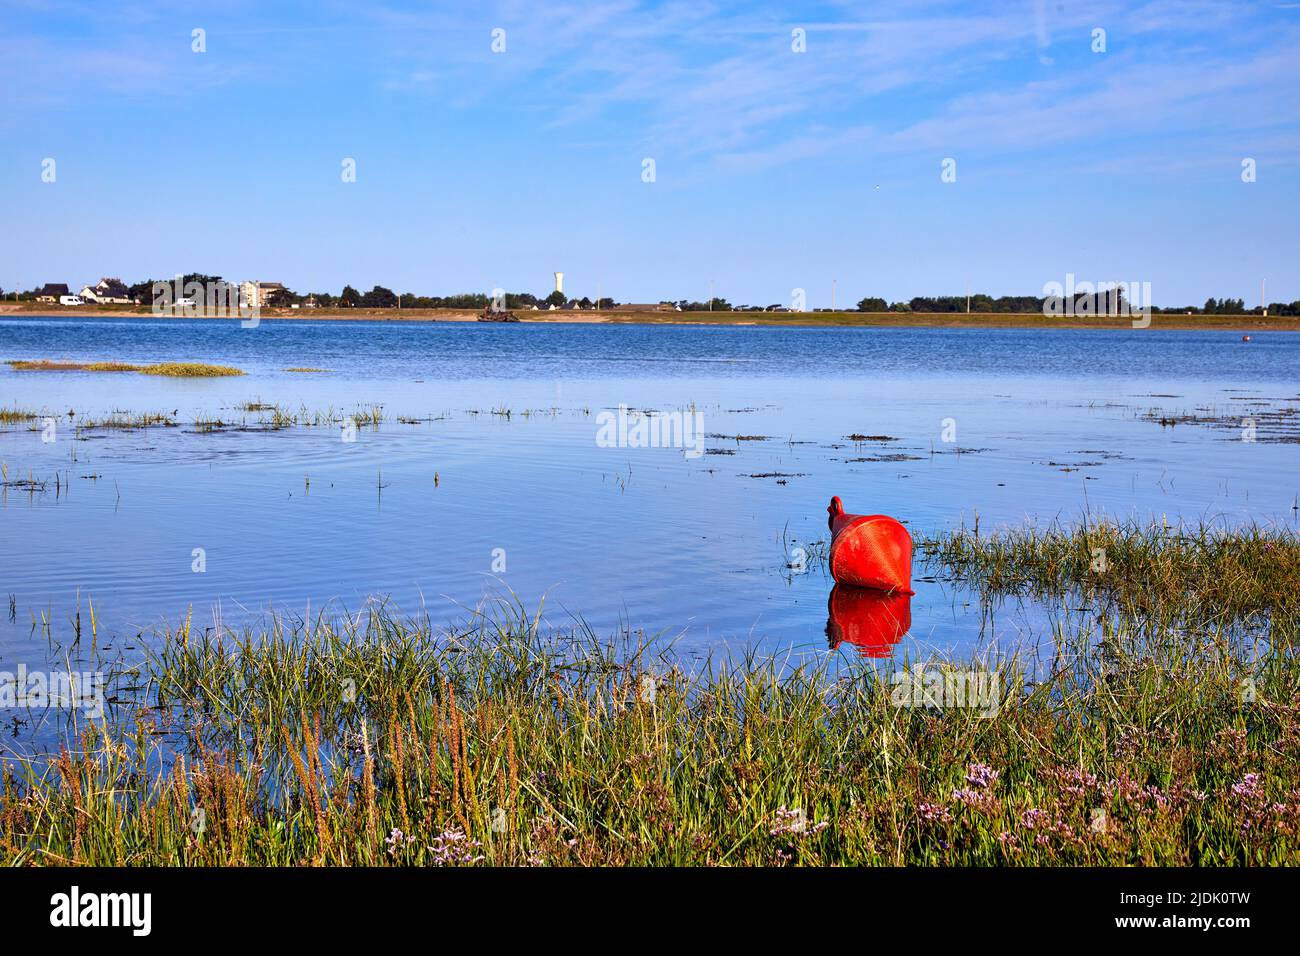 Image of the estuary at Port Bail, France with marker bouy. Stock Photo